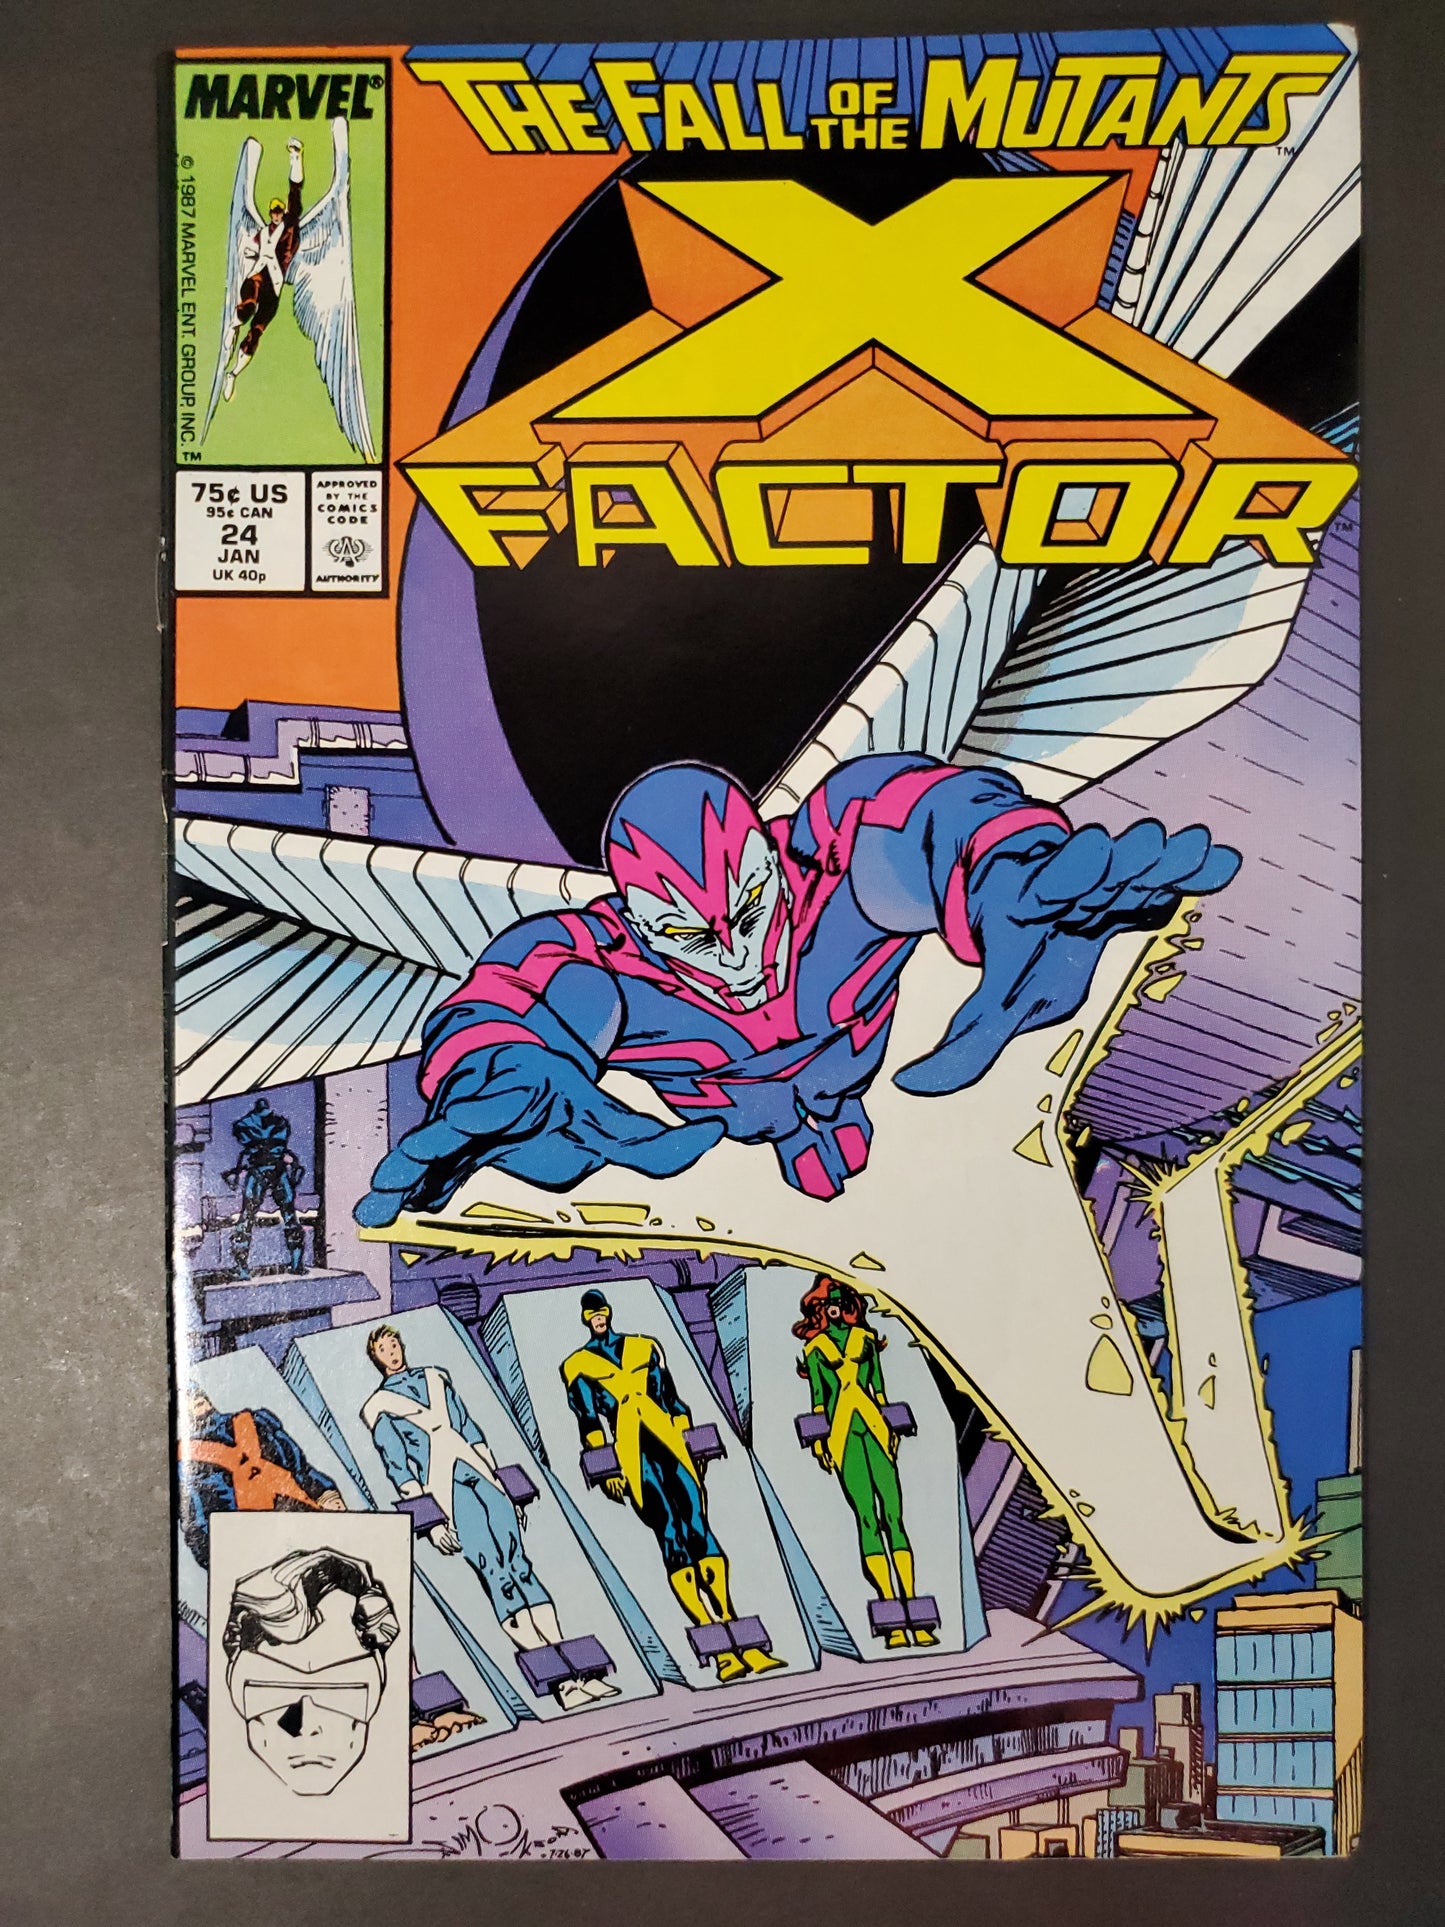 Marvel X-Factor Vol 1 #24 The Fall of The Mutants Key